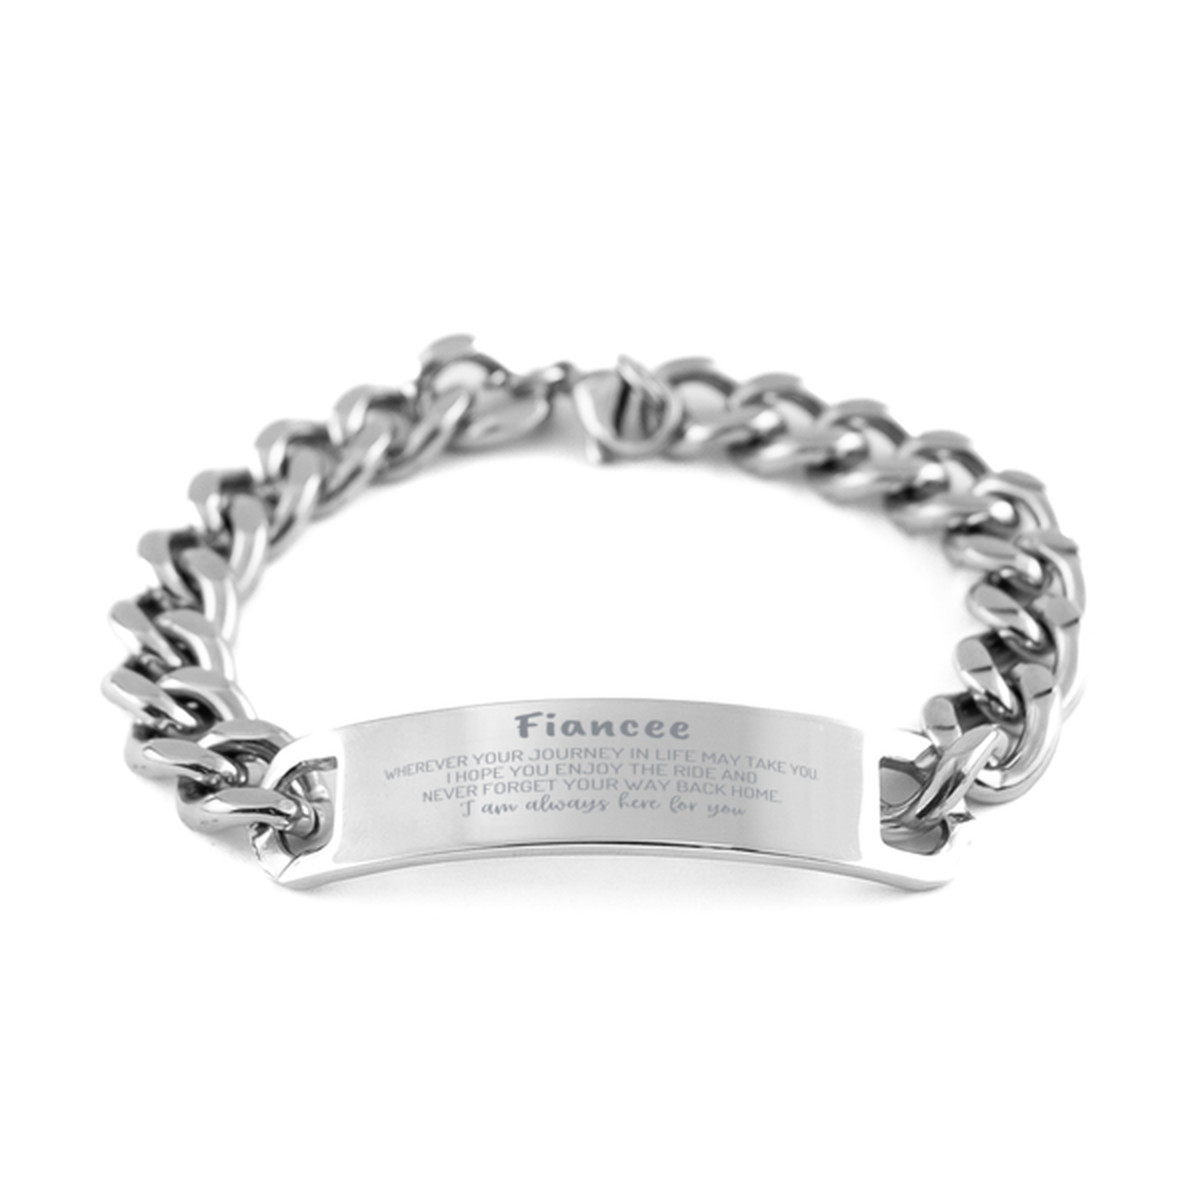 Fiancee wherever your journey in life may take you, I am always here for you Fiancee Cuban Chain Stainless Steel Bracelet, Awesome Christmas Gifts For Fiancee, Fiancee Birthday Gifts for Men Women Family Loved One